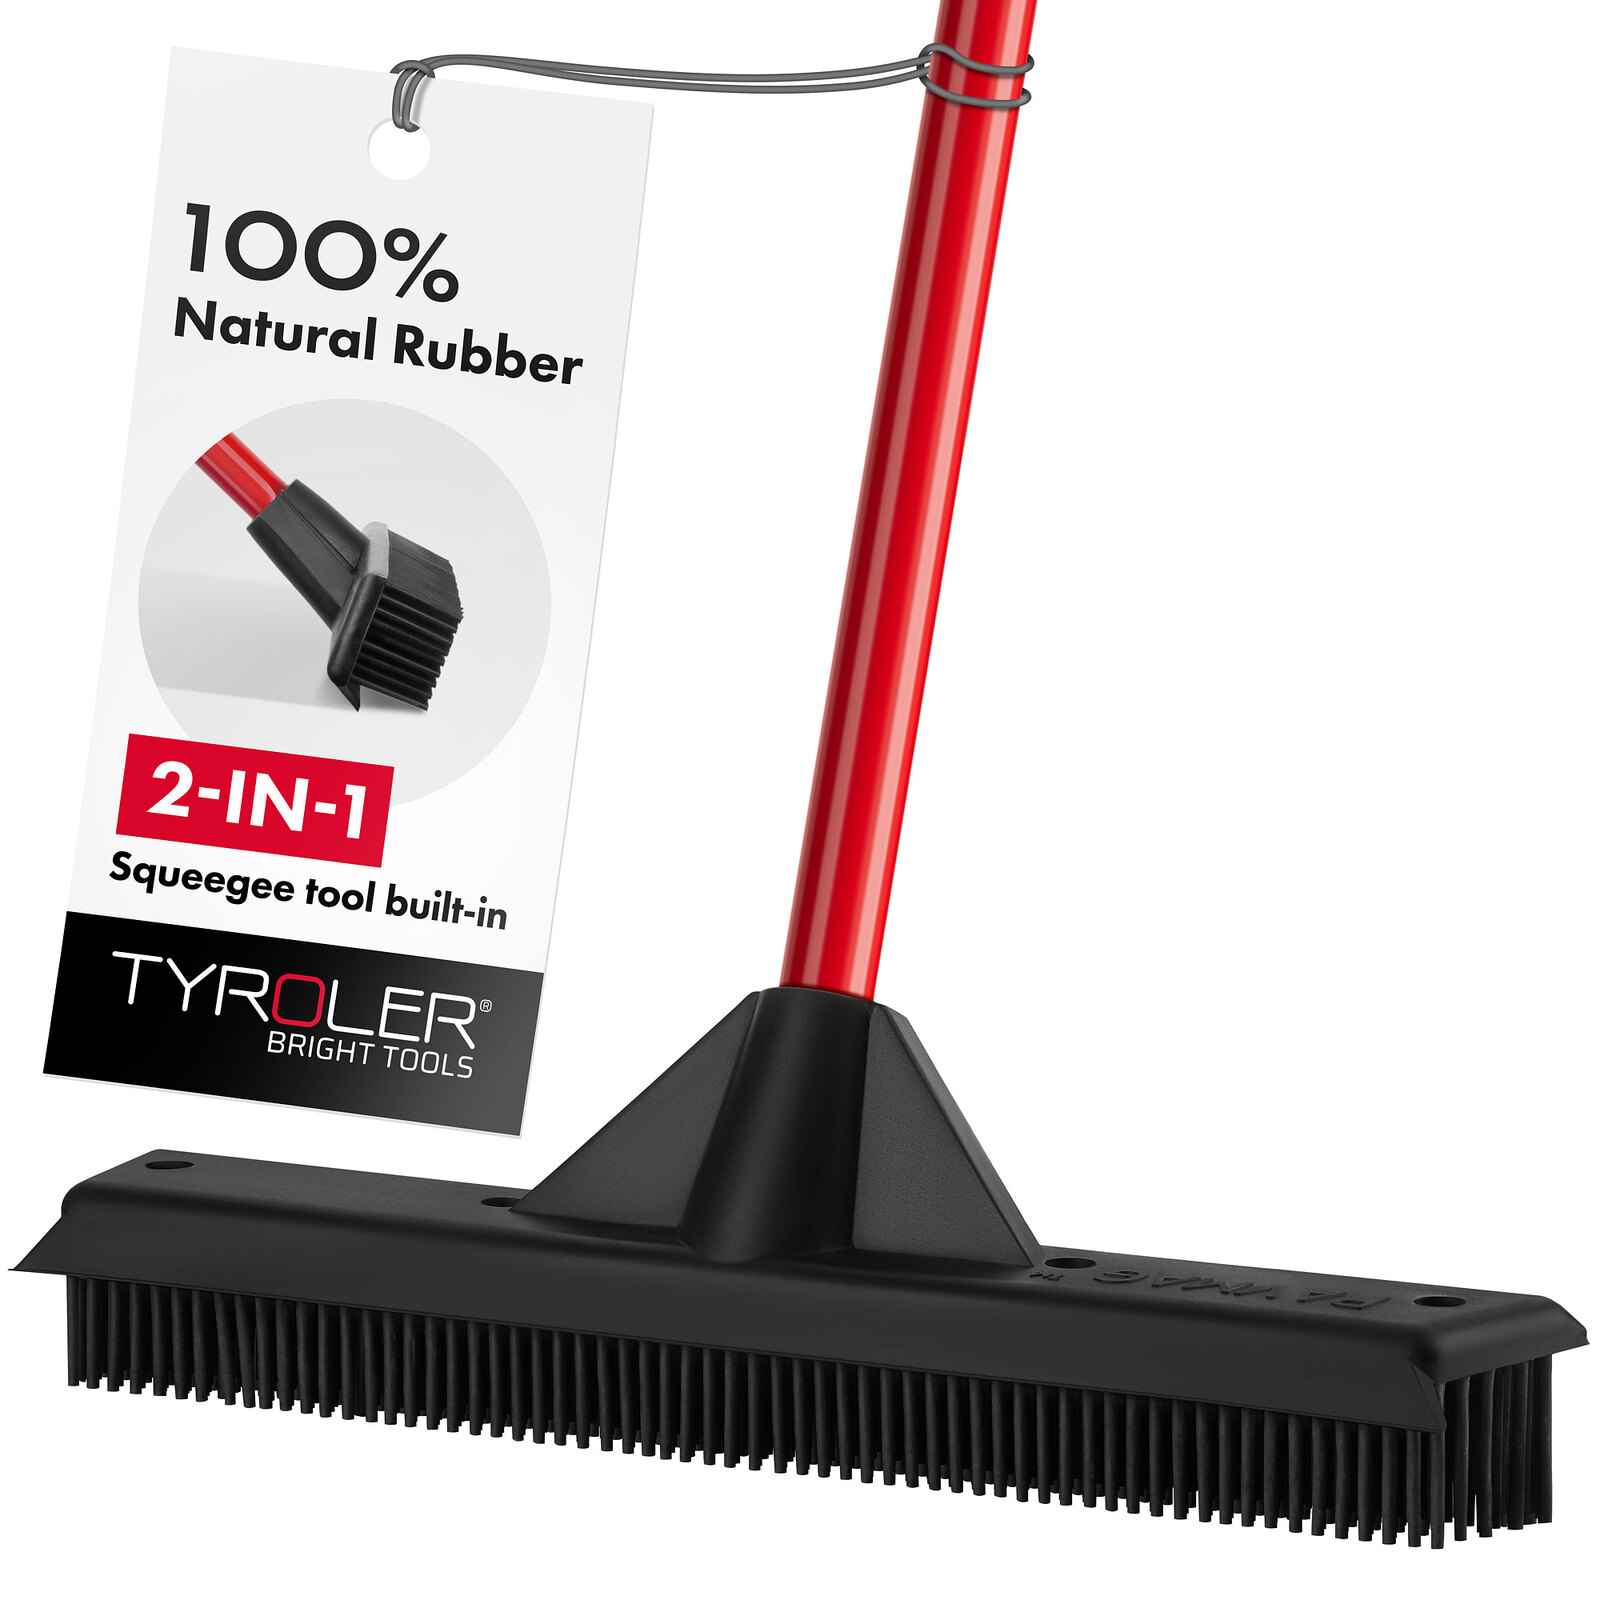 Rubber Broom Head for Click System